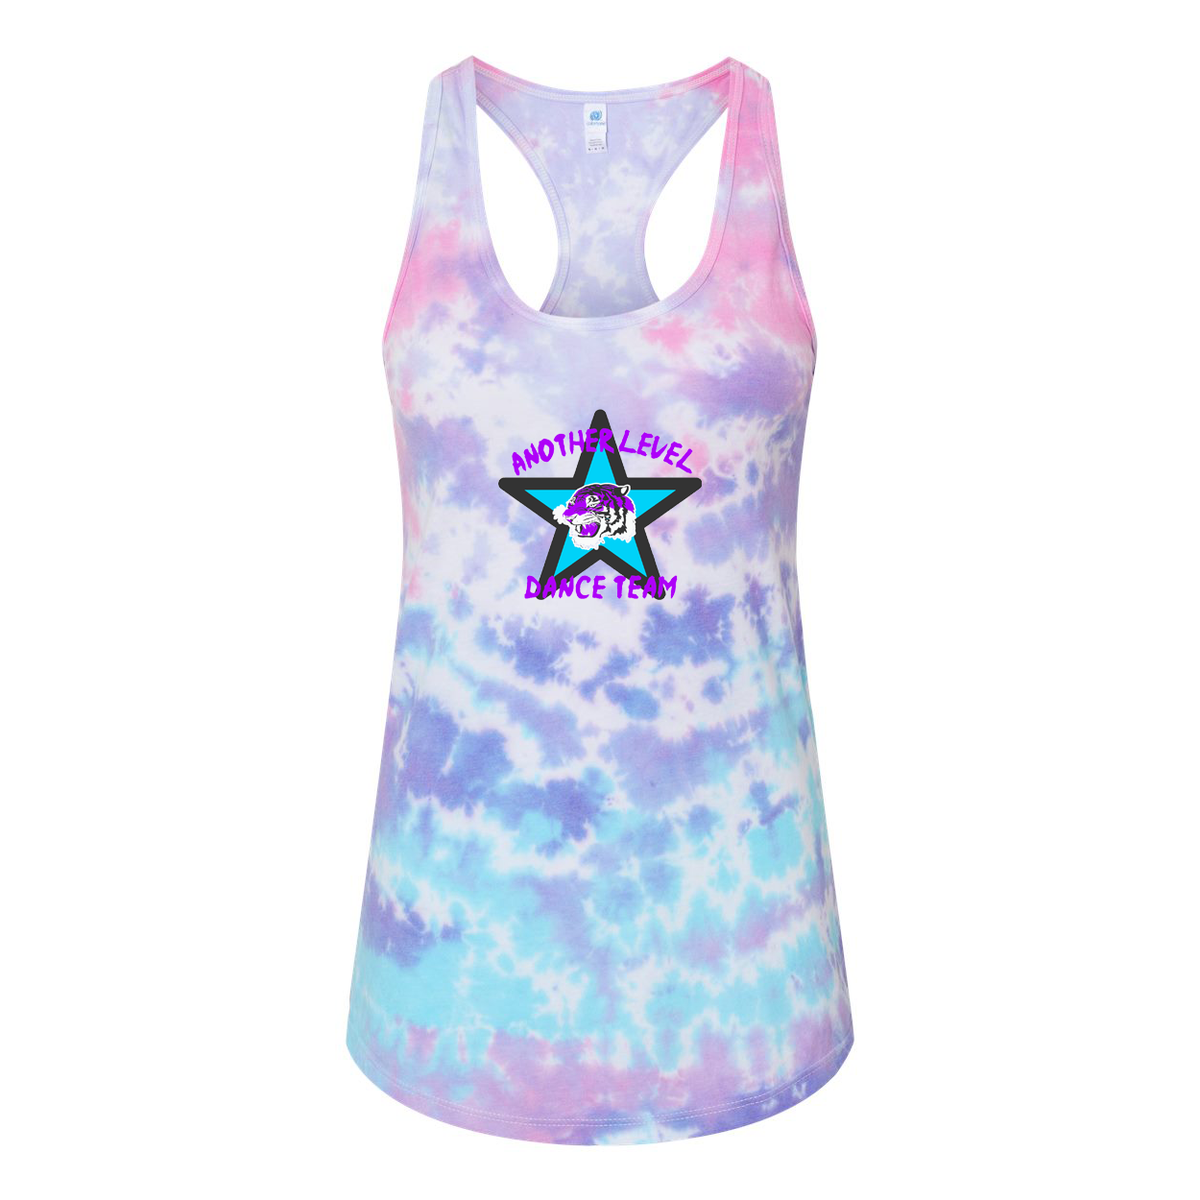 Another Level Dance Team Tie-Dyed Racerback Tank Top